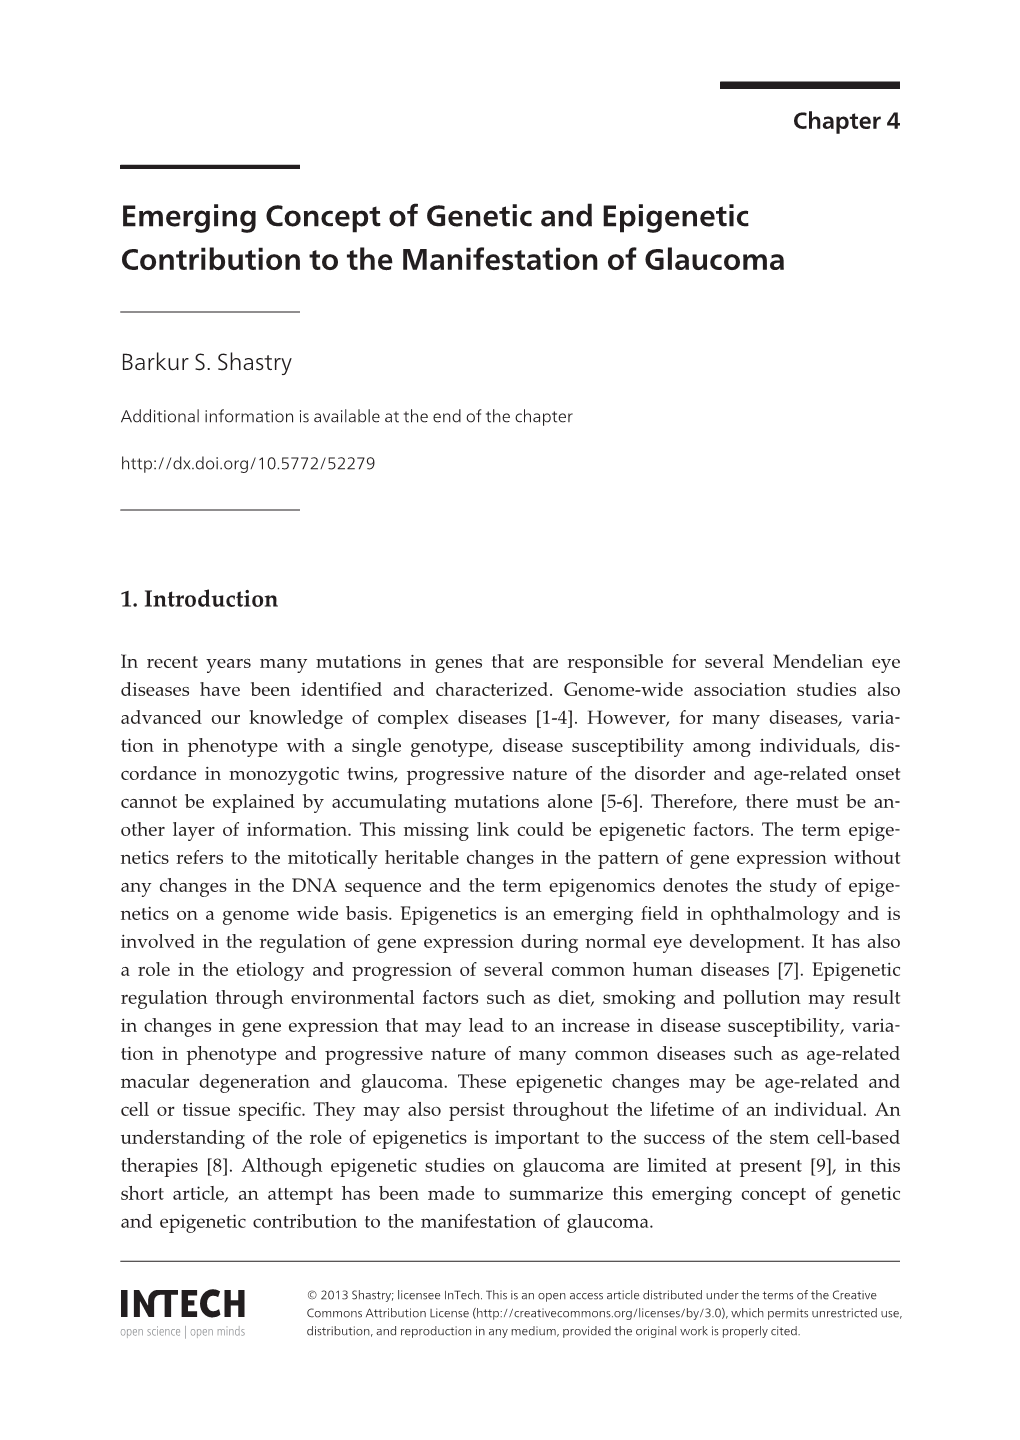 Emerging Concept of Genetic and Epigenetic Contribution to the Manifestation of Glaucoma